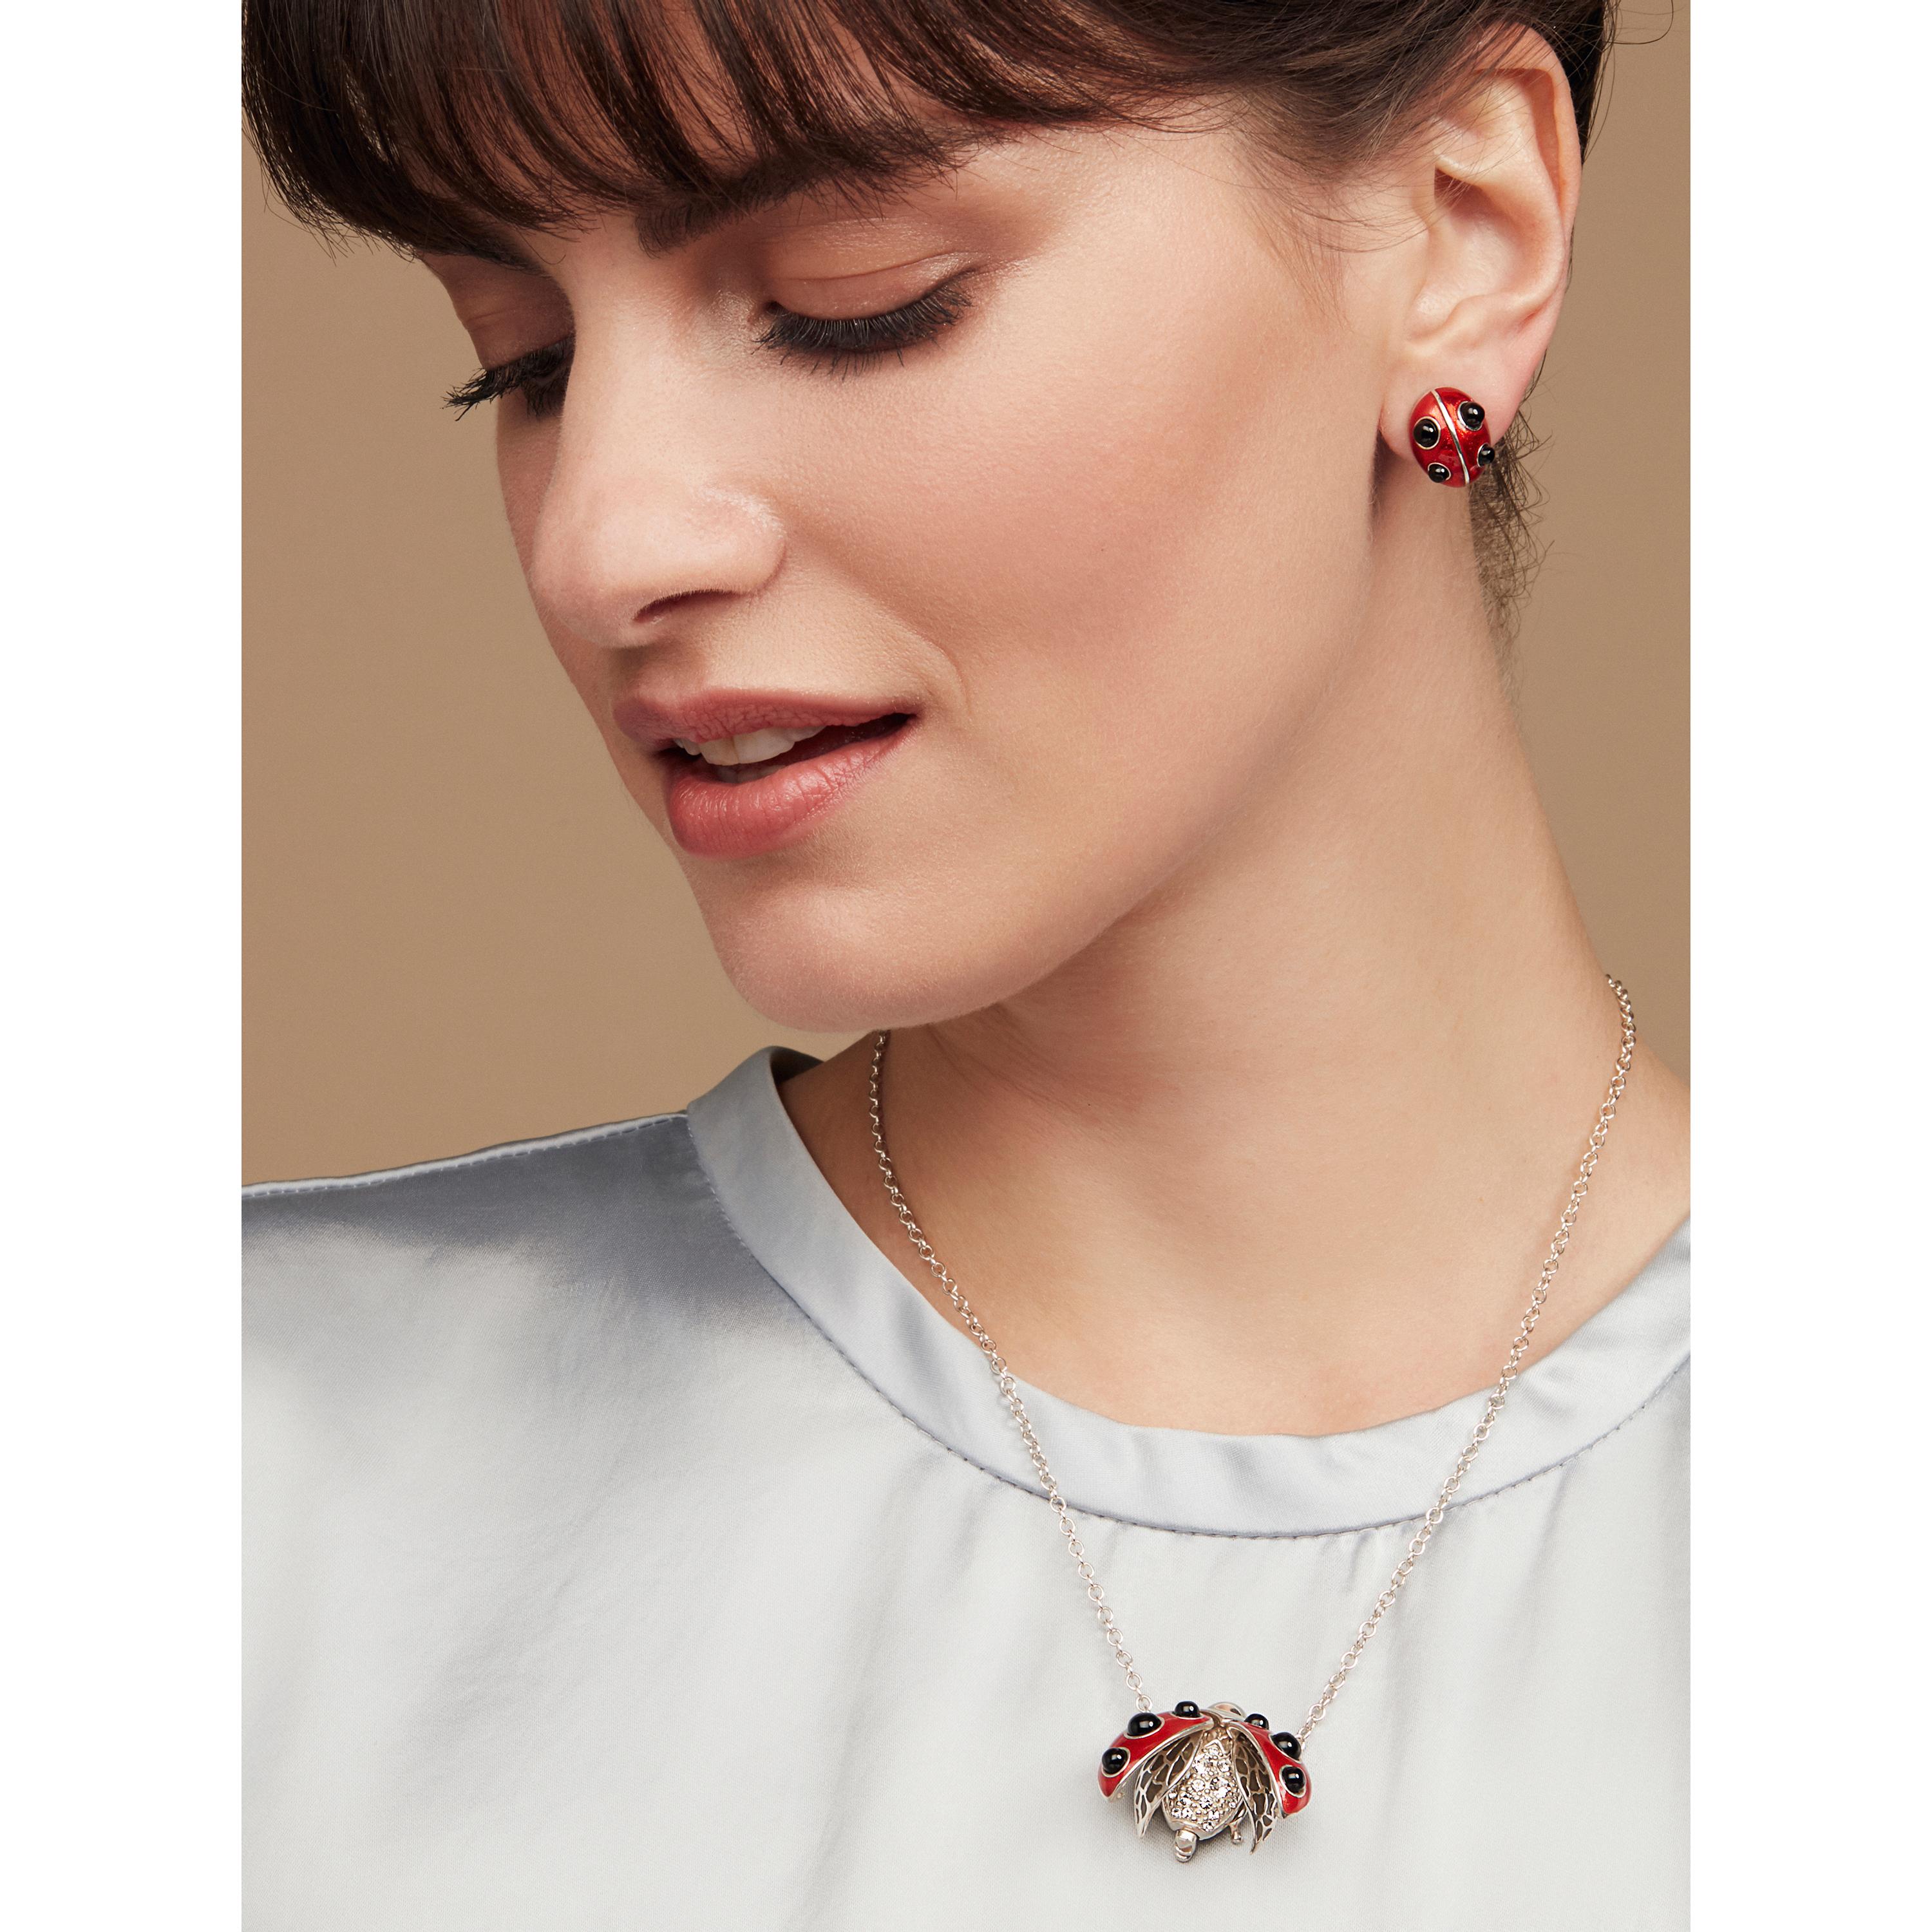 This Ladybird pendant perfectly embodies love, full of crafted details and charm. It is set with real onyx stones with hand enamelling. Its wing cases spring open to reveal ‘plique-a-jour’ enamelled wings and a hand set crystal encrusted body.